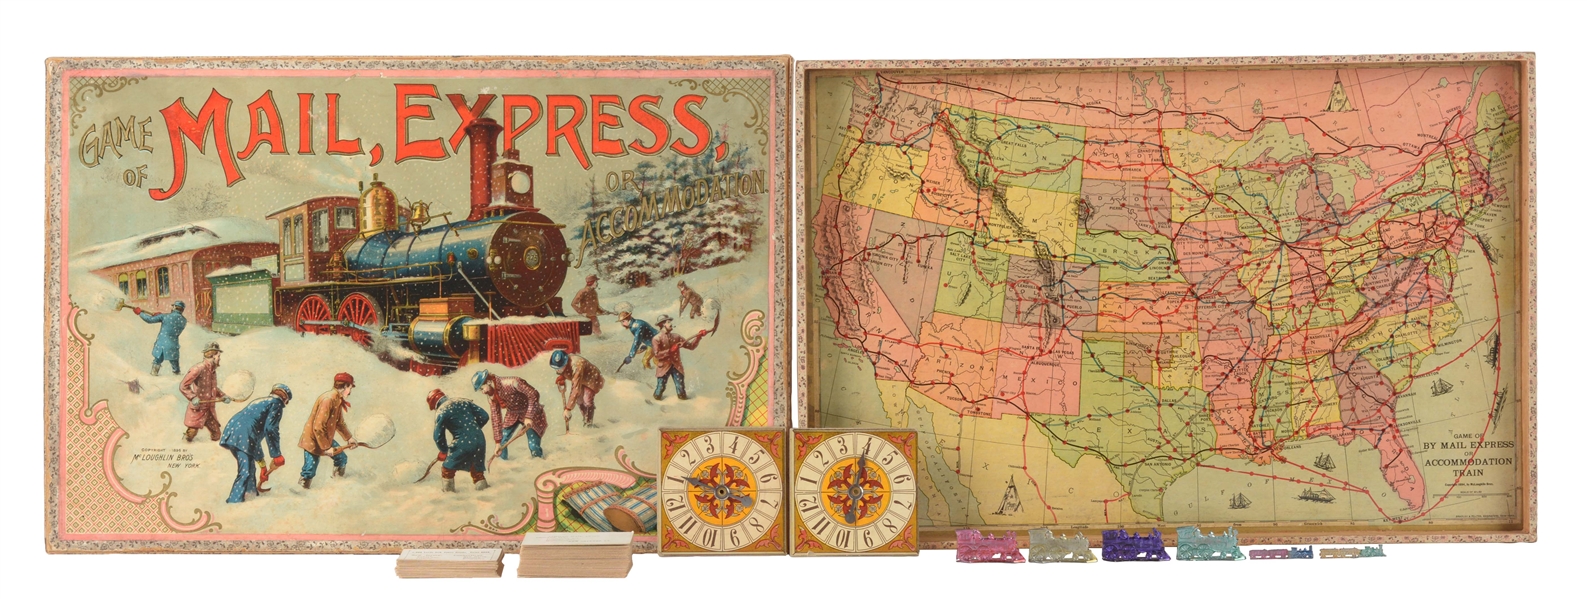 EARLY MCLOUGHLIN BROS. GAME OF MAIL EXPRESS. 